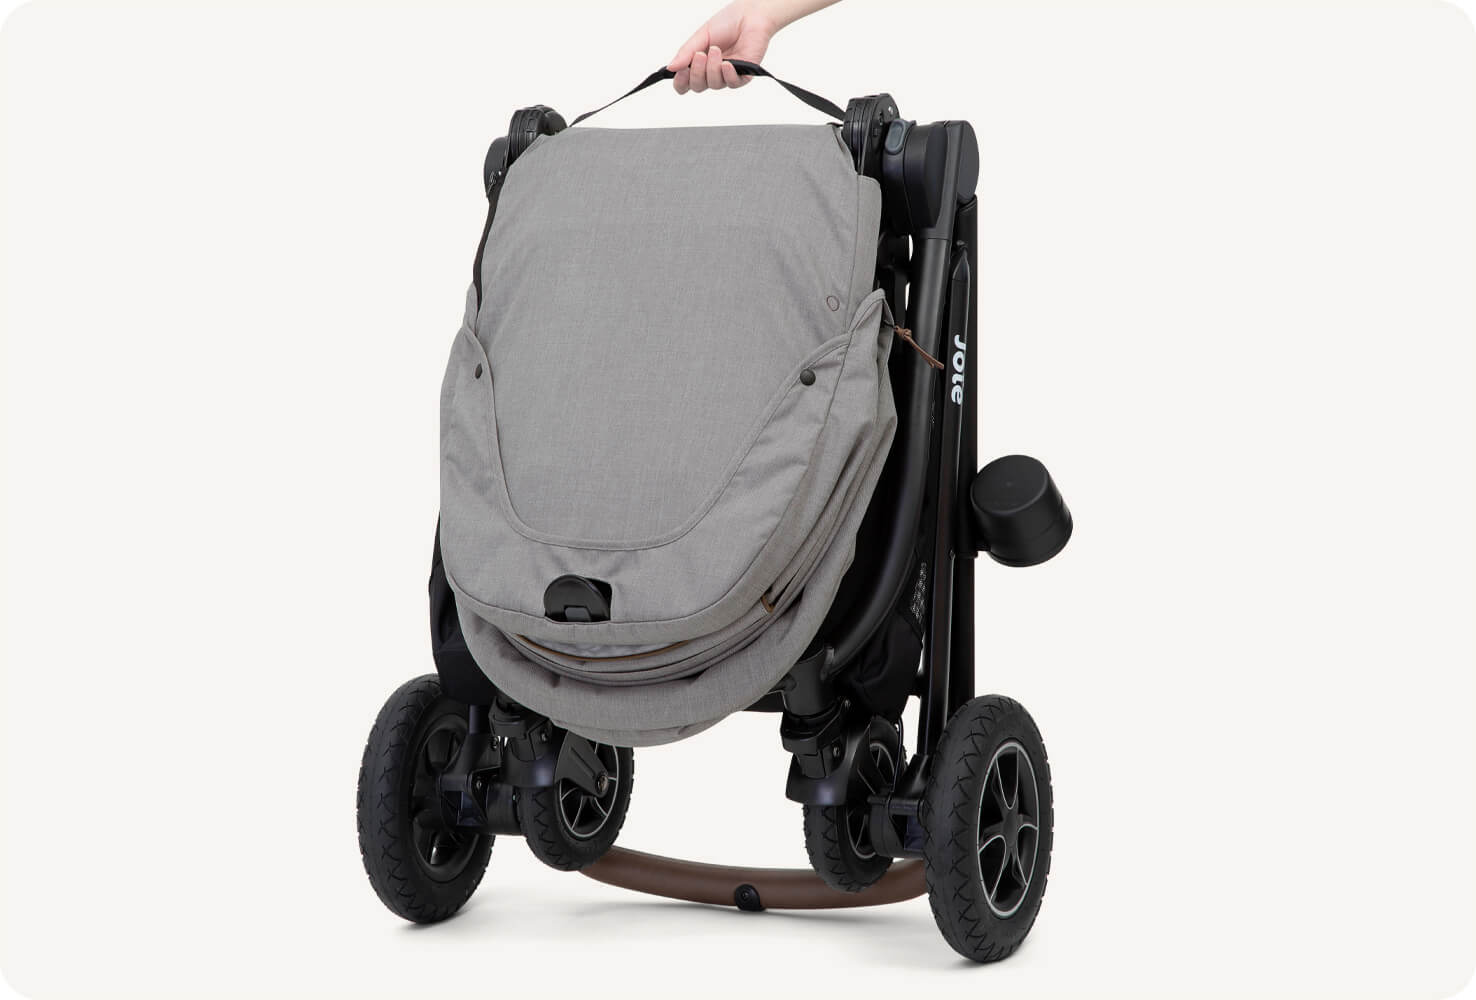  Zoomed in view of the folded light gray and black Joie versatrax pram. 